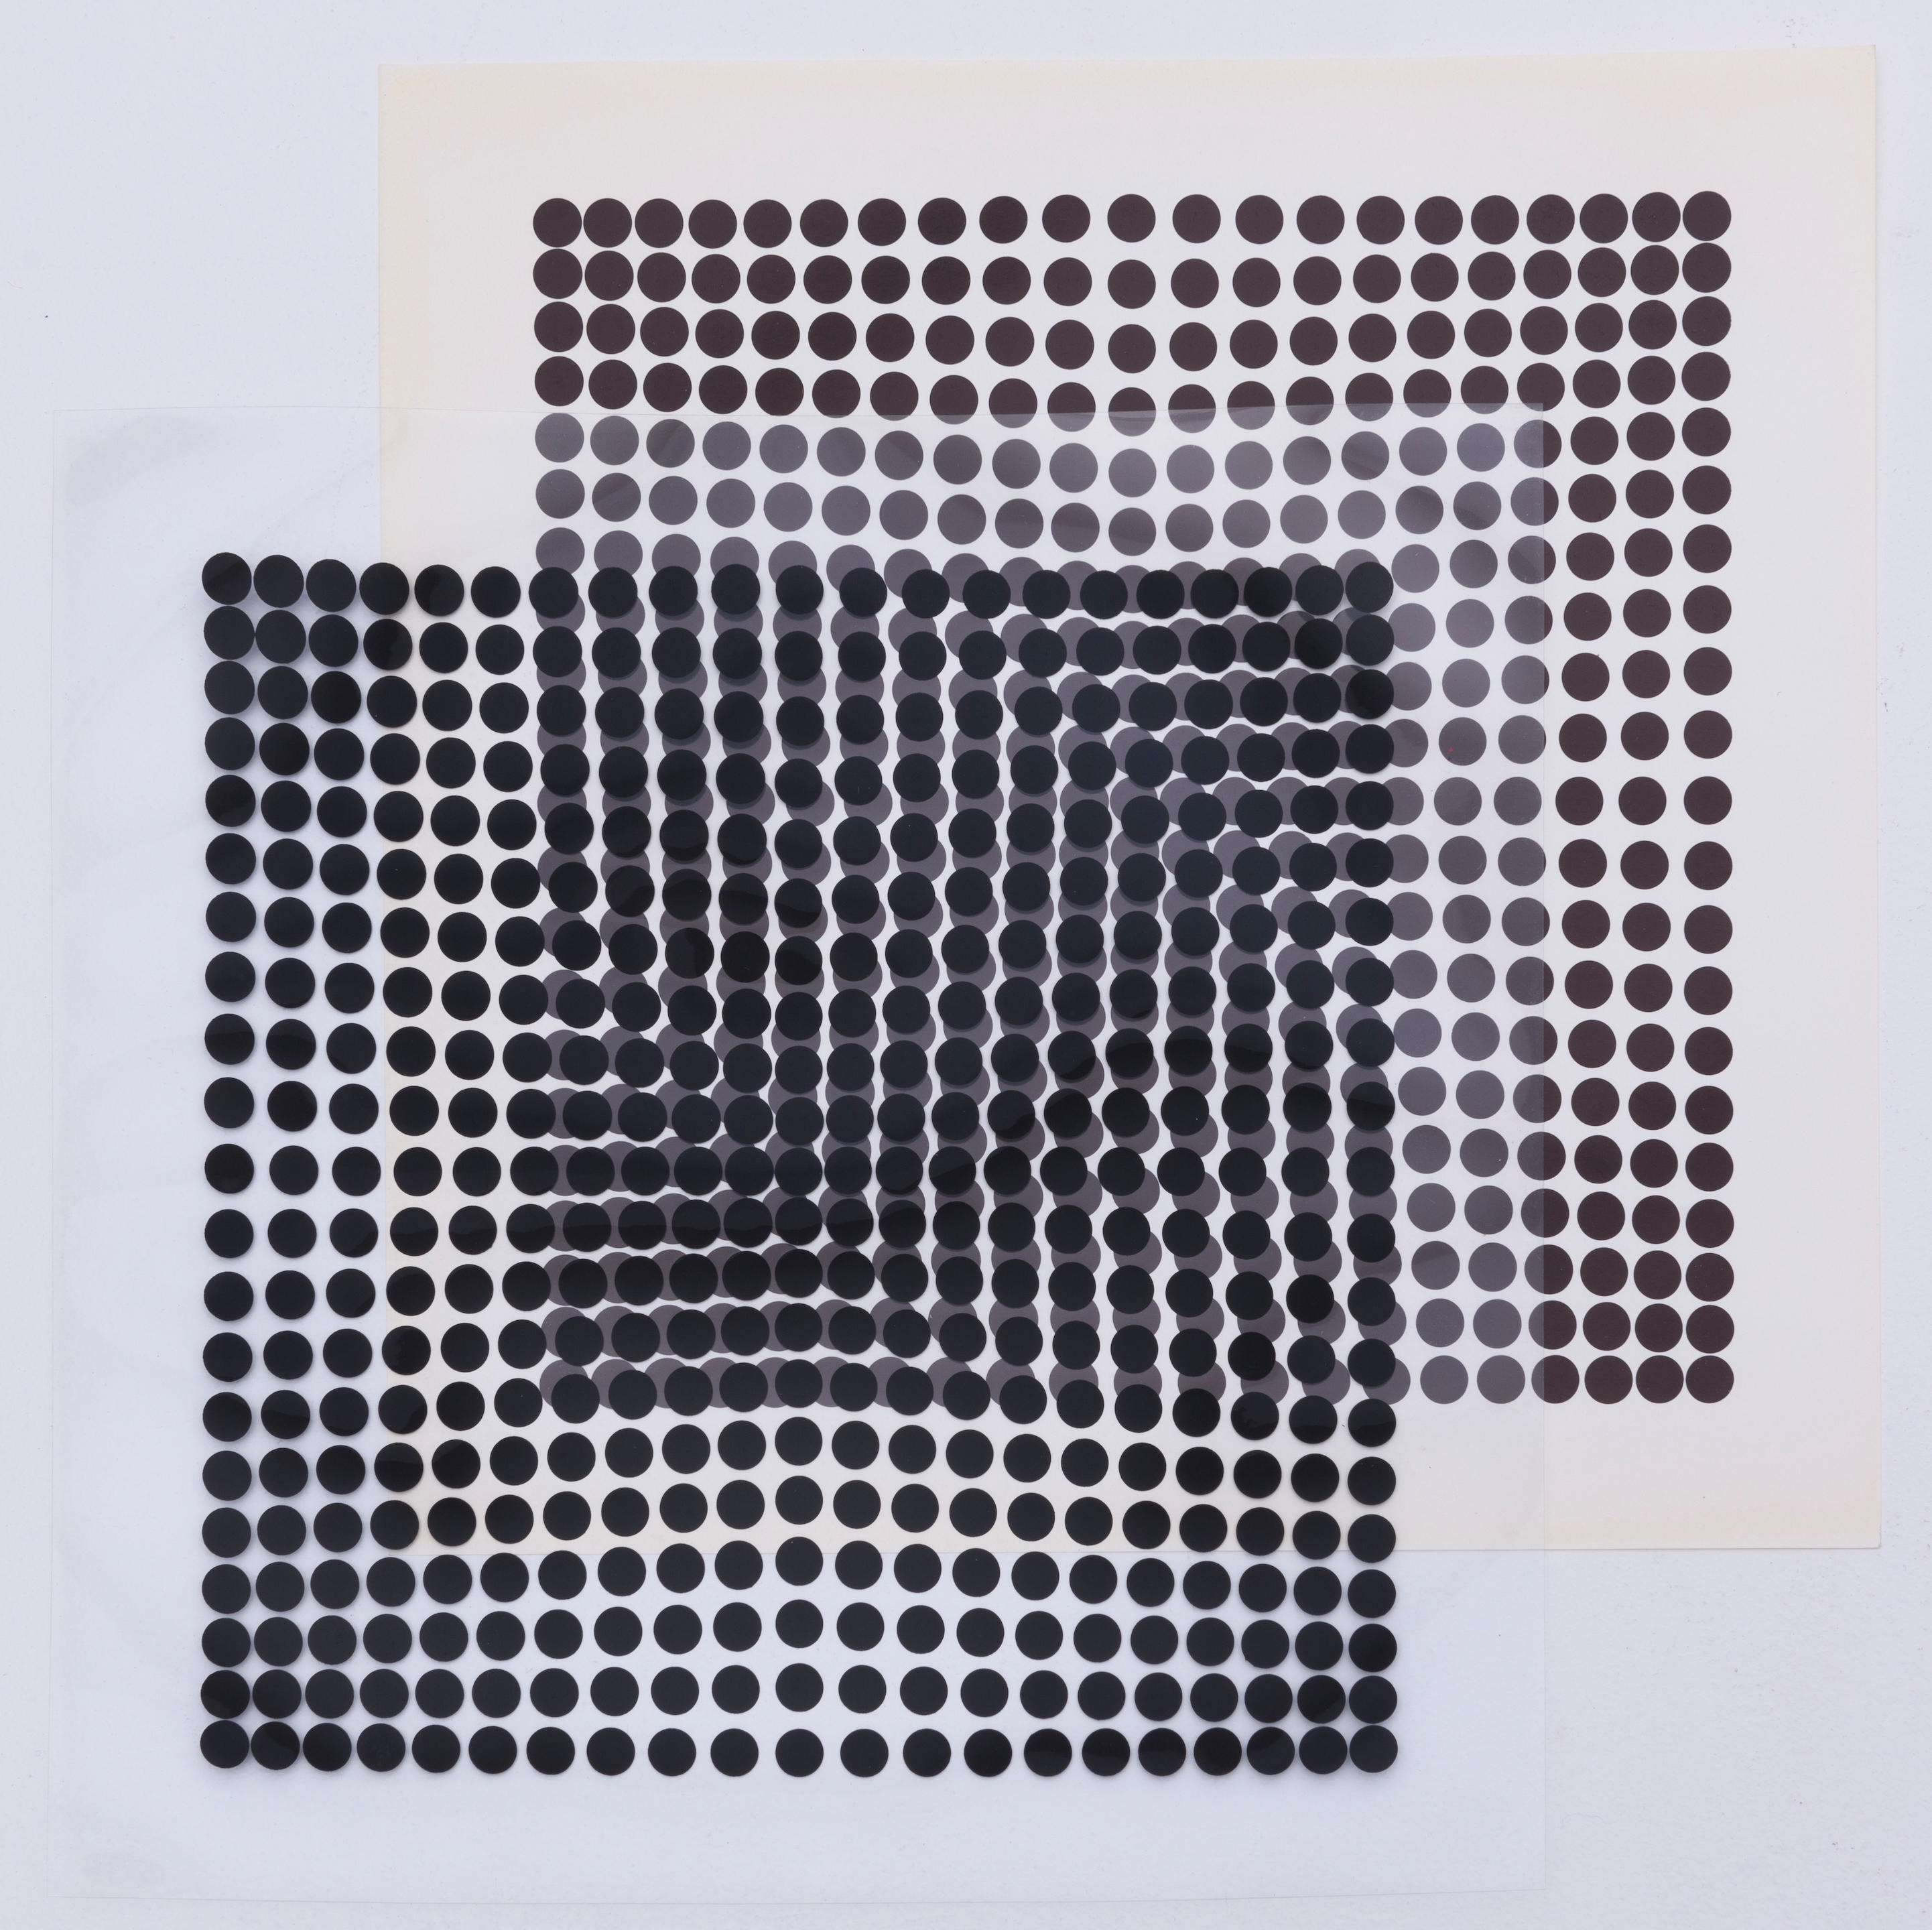 Oeuvres profondes cinétiques,	1973 by Victor Vasarely, 1973